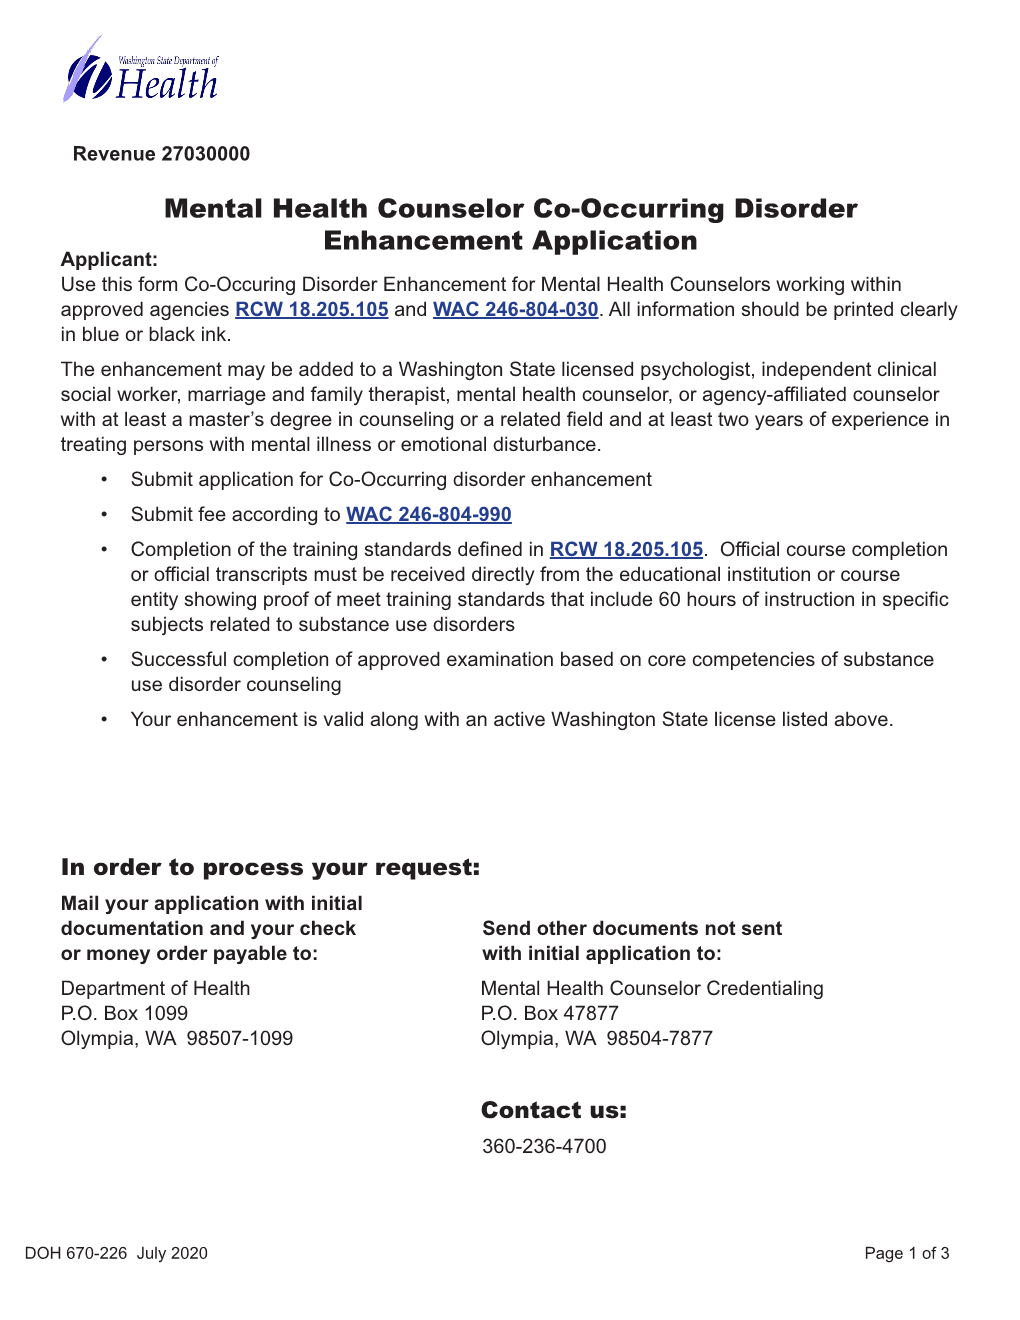 Mental Health Counselor Co-Occurring Disorder Enhancement Application